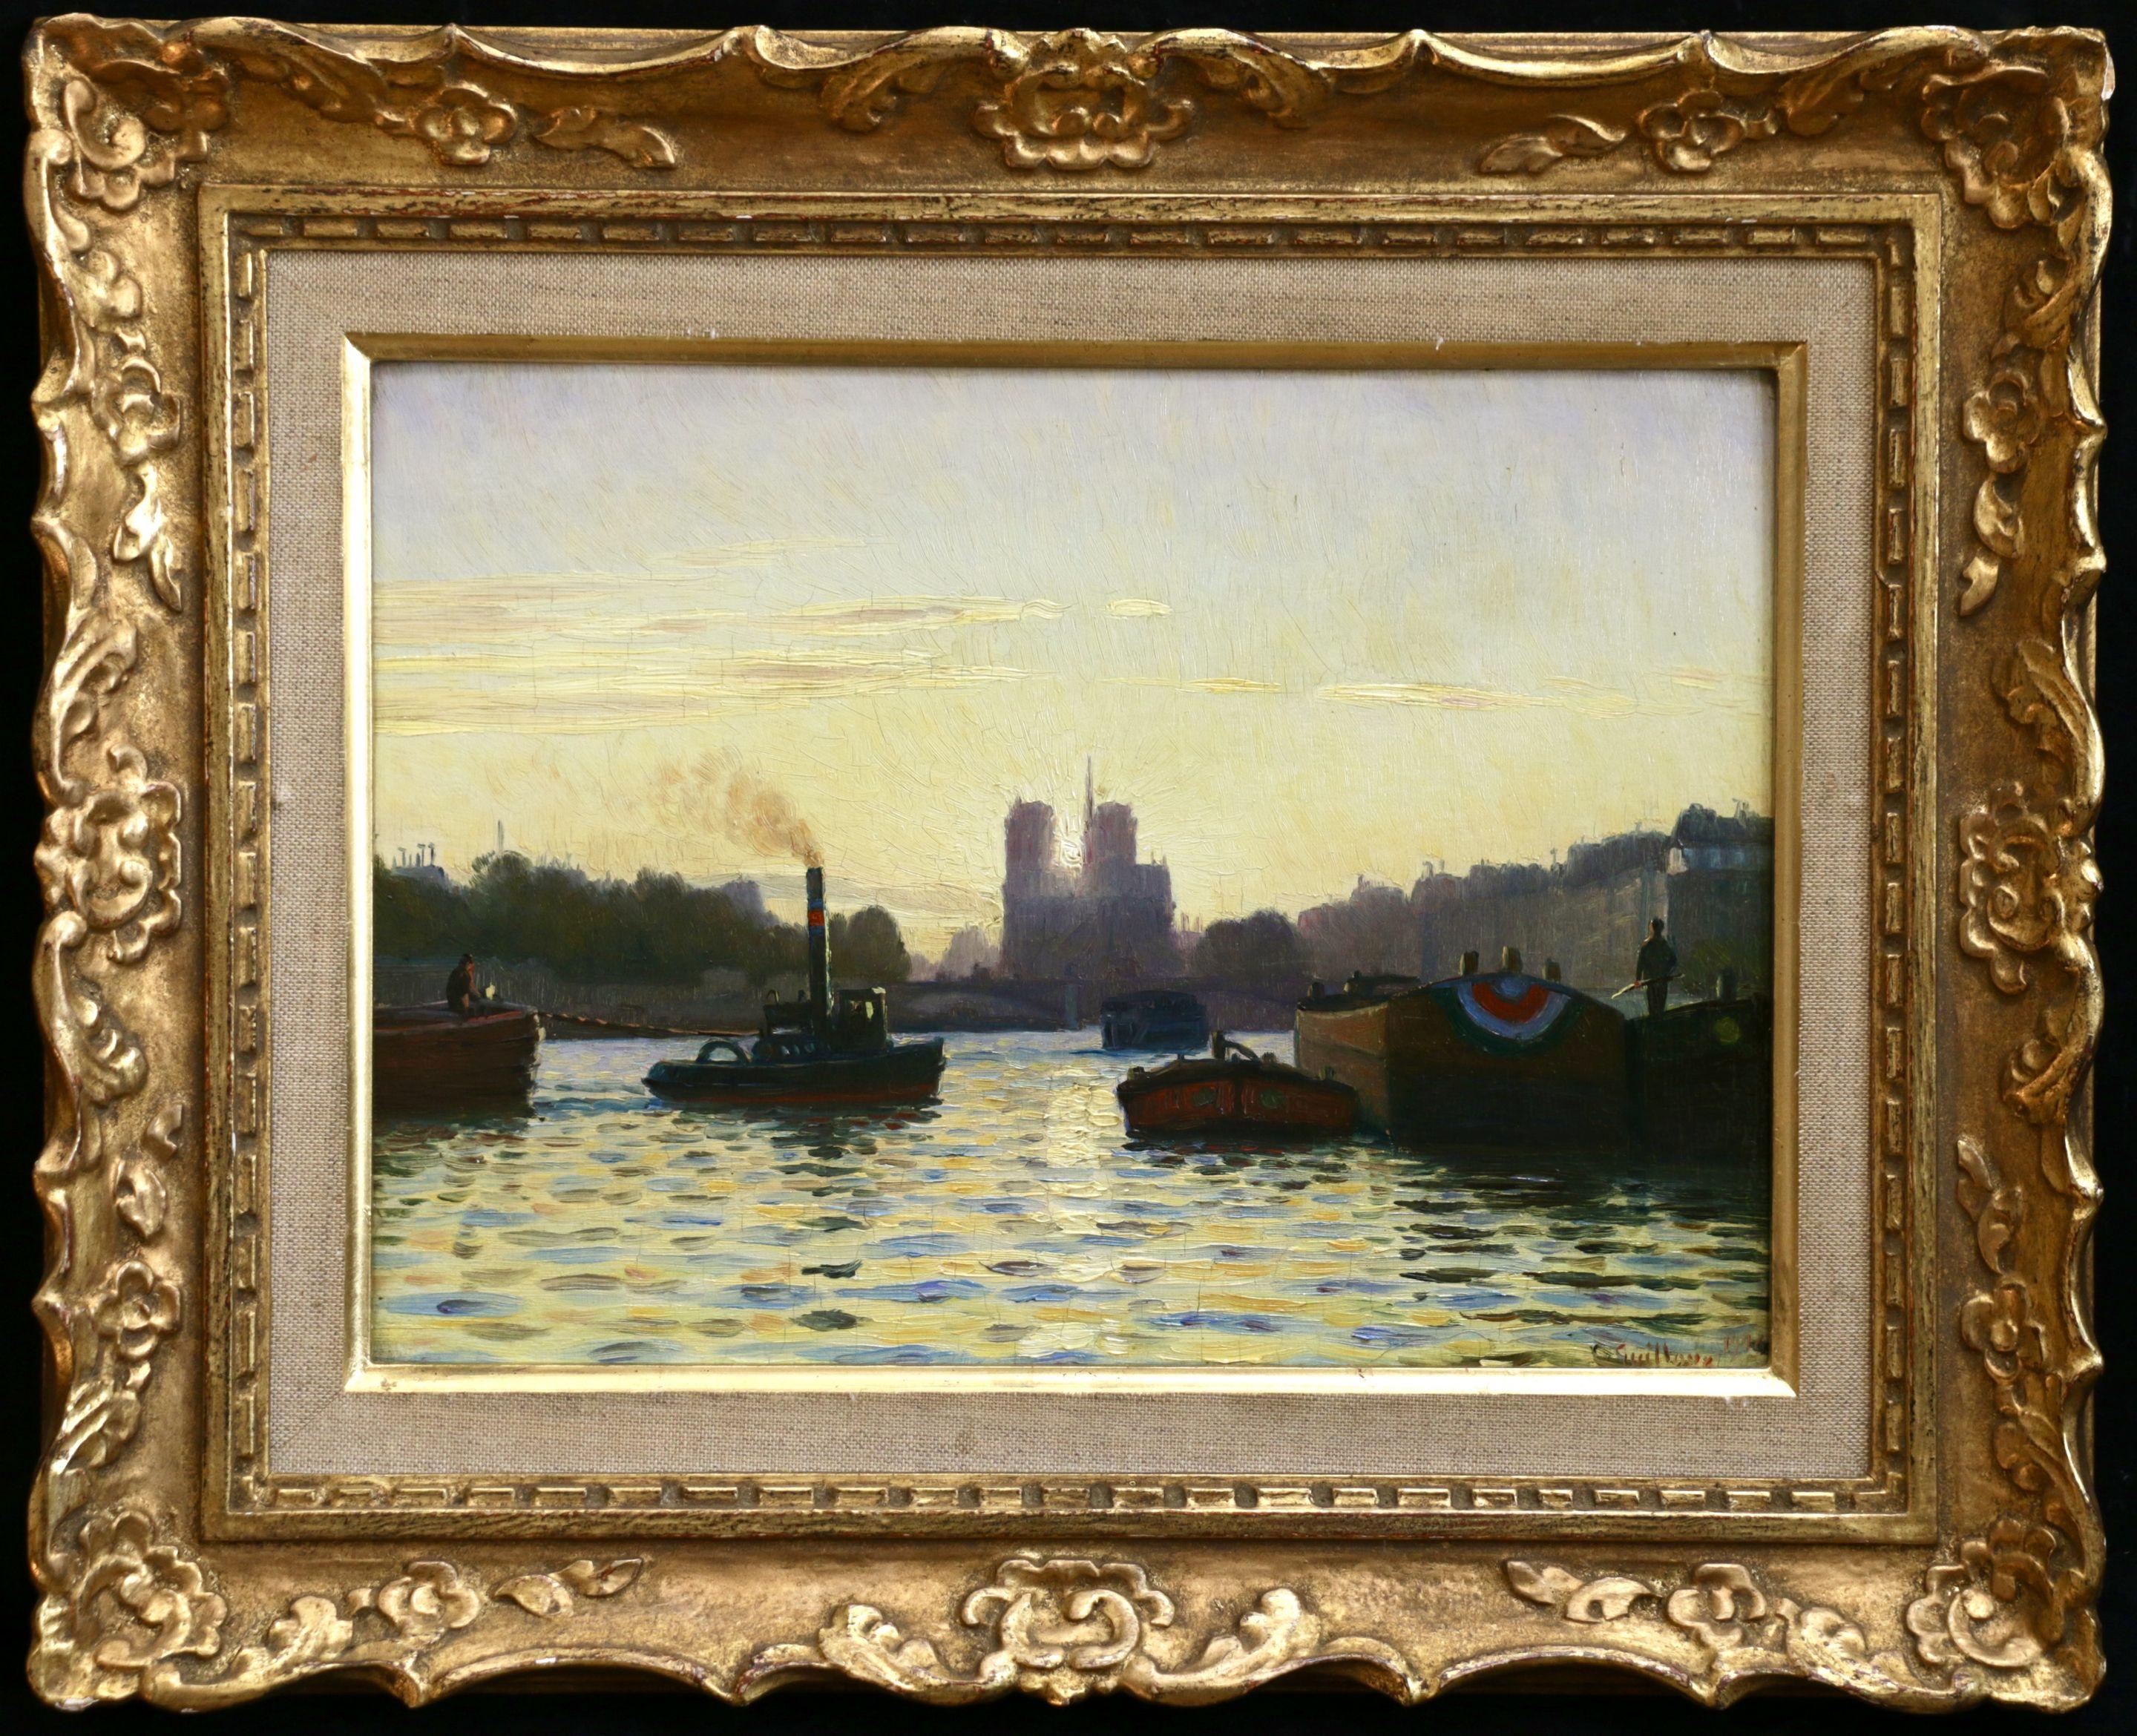 Sunrise - Notre Dame de Paris - 19th Century Oil,  Boats on River by C Guilloux - Painting by Charles-Victor Guilloux